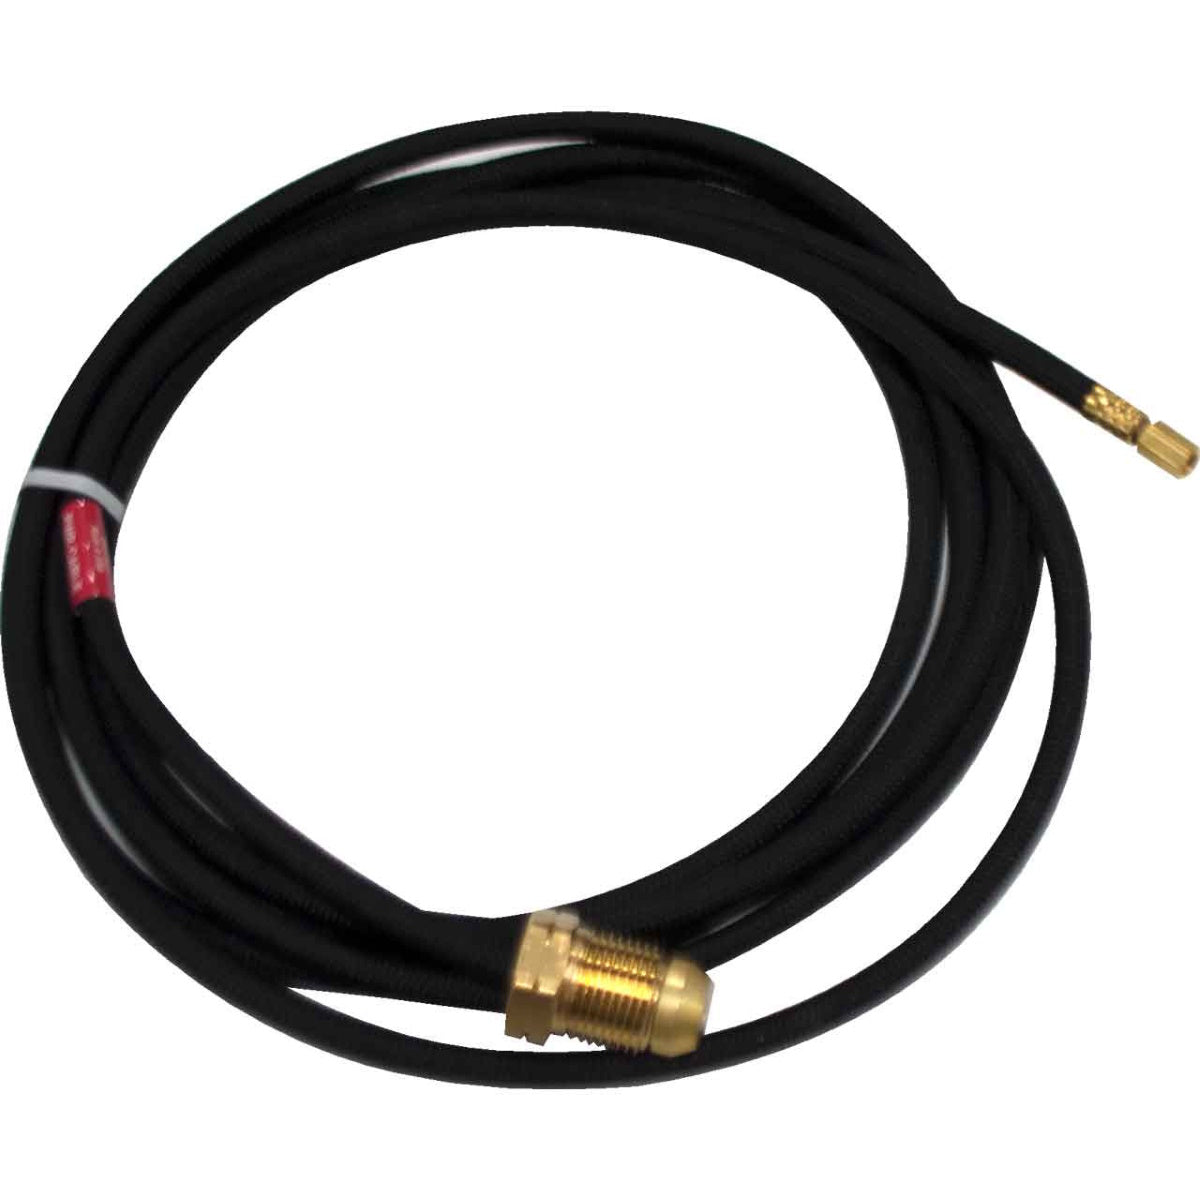 Weldtec Rubber Power Cable for 20, 24, and 25 Torches 